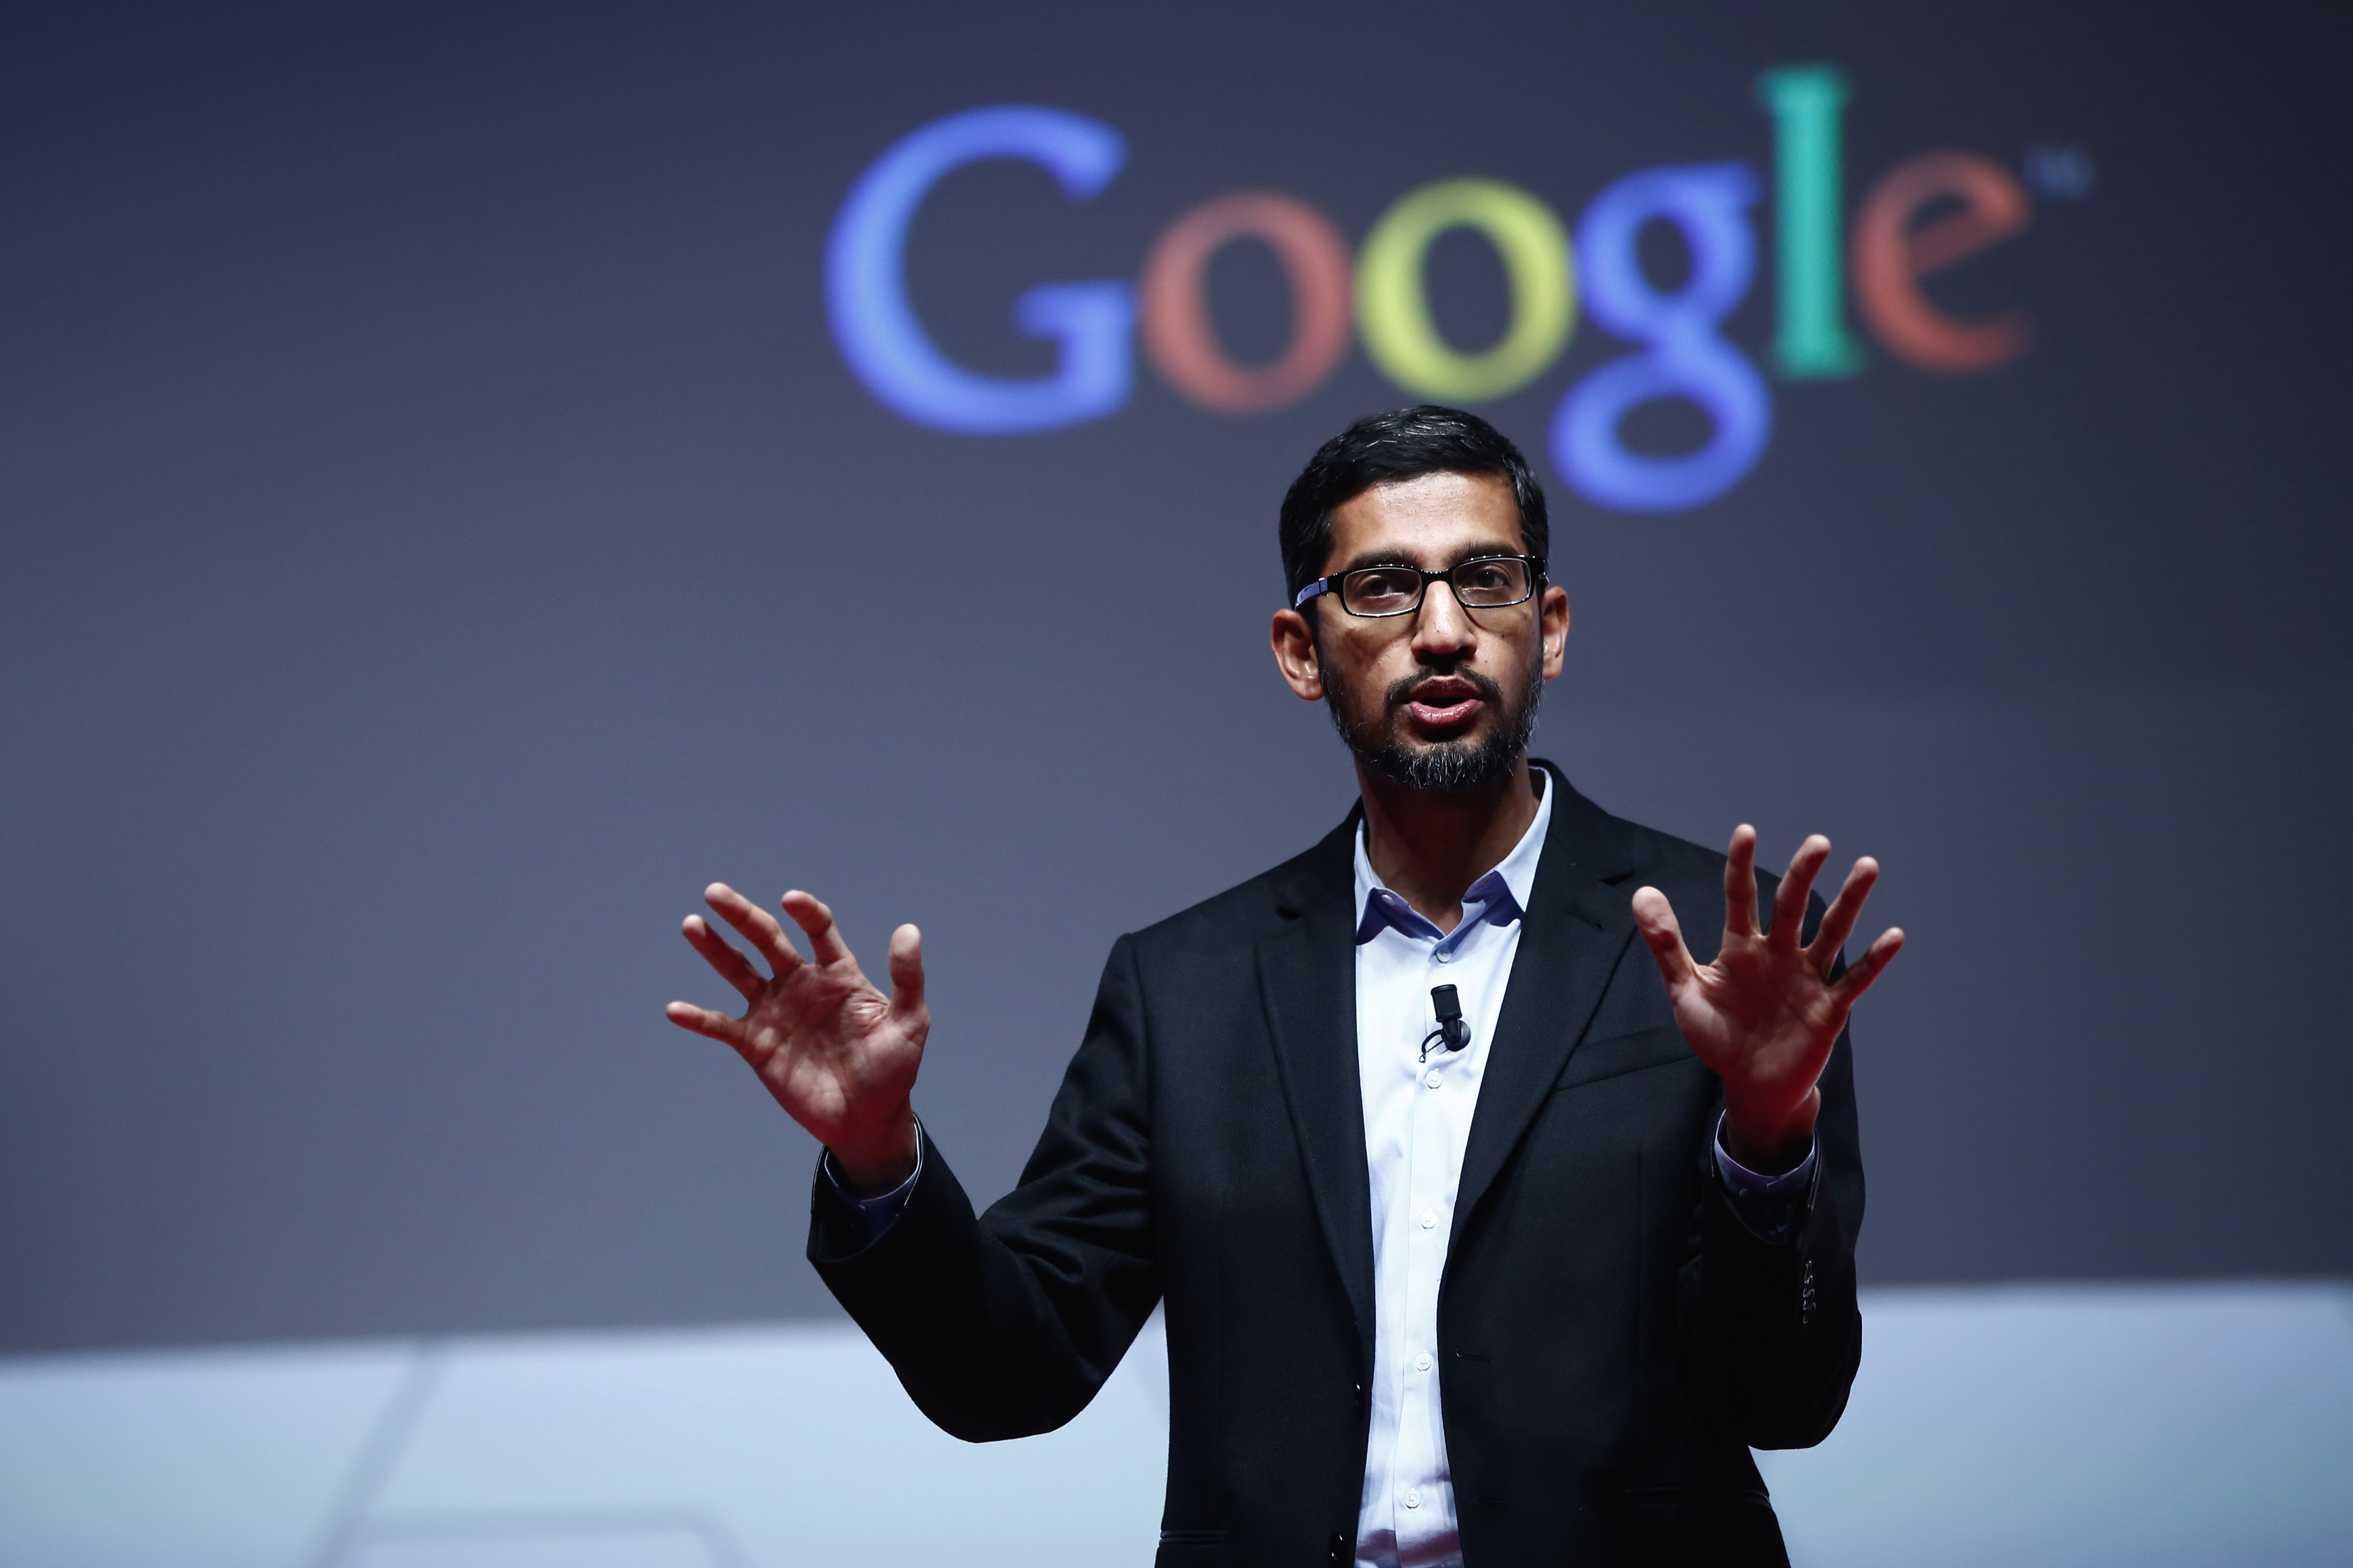 Sundar Pichai, senior vice president of Android, Chrome and Apps at Google Inc., speaks during a keynote session at the Mobile World Congress in Barcelona, Spain, on Monday, March 2, 2015. The event, which generates several hundred million euros in revenue for the city of Barcelona each year, also means the world for a week turns its attention back to Europe for the latest in technology, despite a lagging ecosystem. Photographer: Simon Dawson/Bloomberg via Getty Images